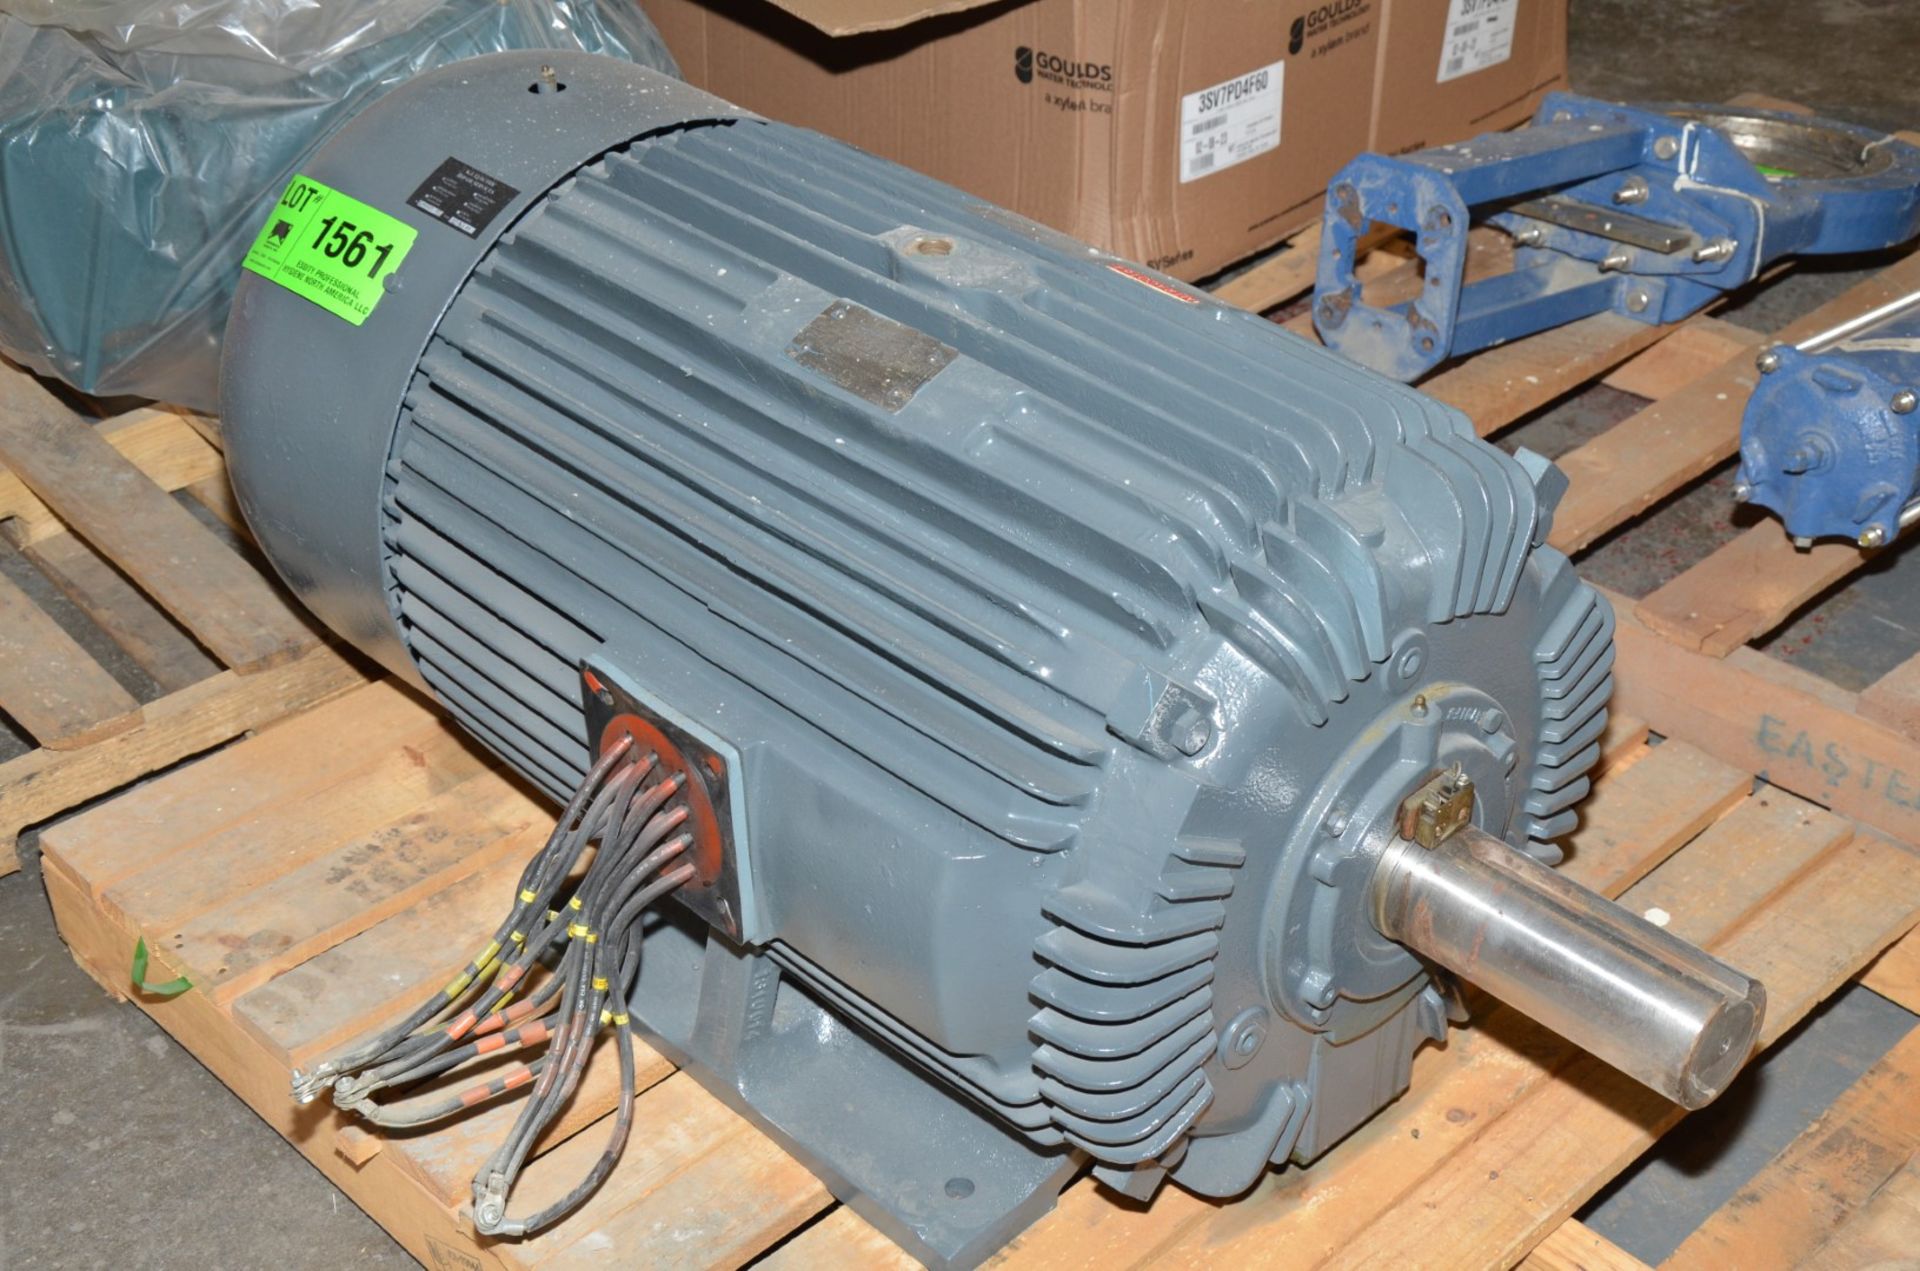 TOSHIBA 200 HP 1780 RPM ELECTRIC MOTOR [RIGGING FEE FOR LOT #1561 - $50 USD PLUS APPLICABLE TAXES] - Bild 2 aus 3